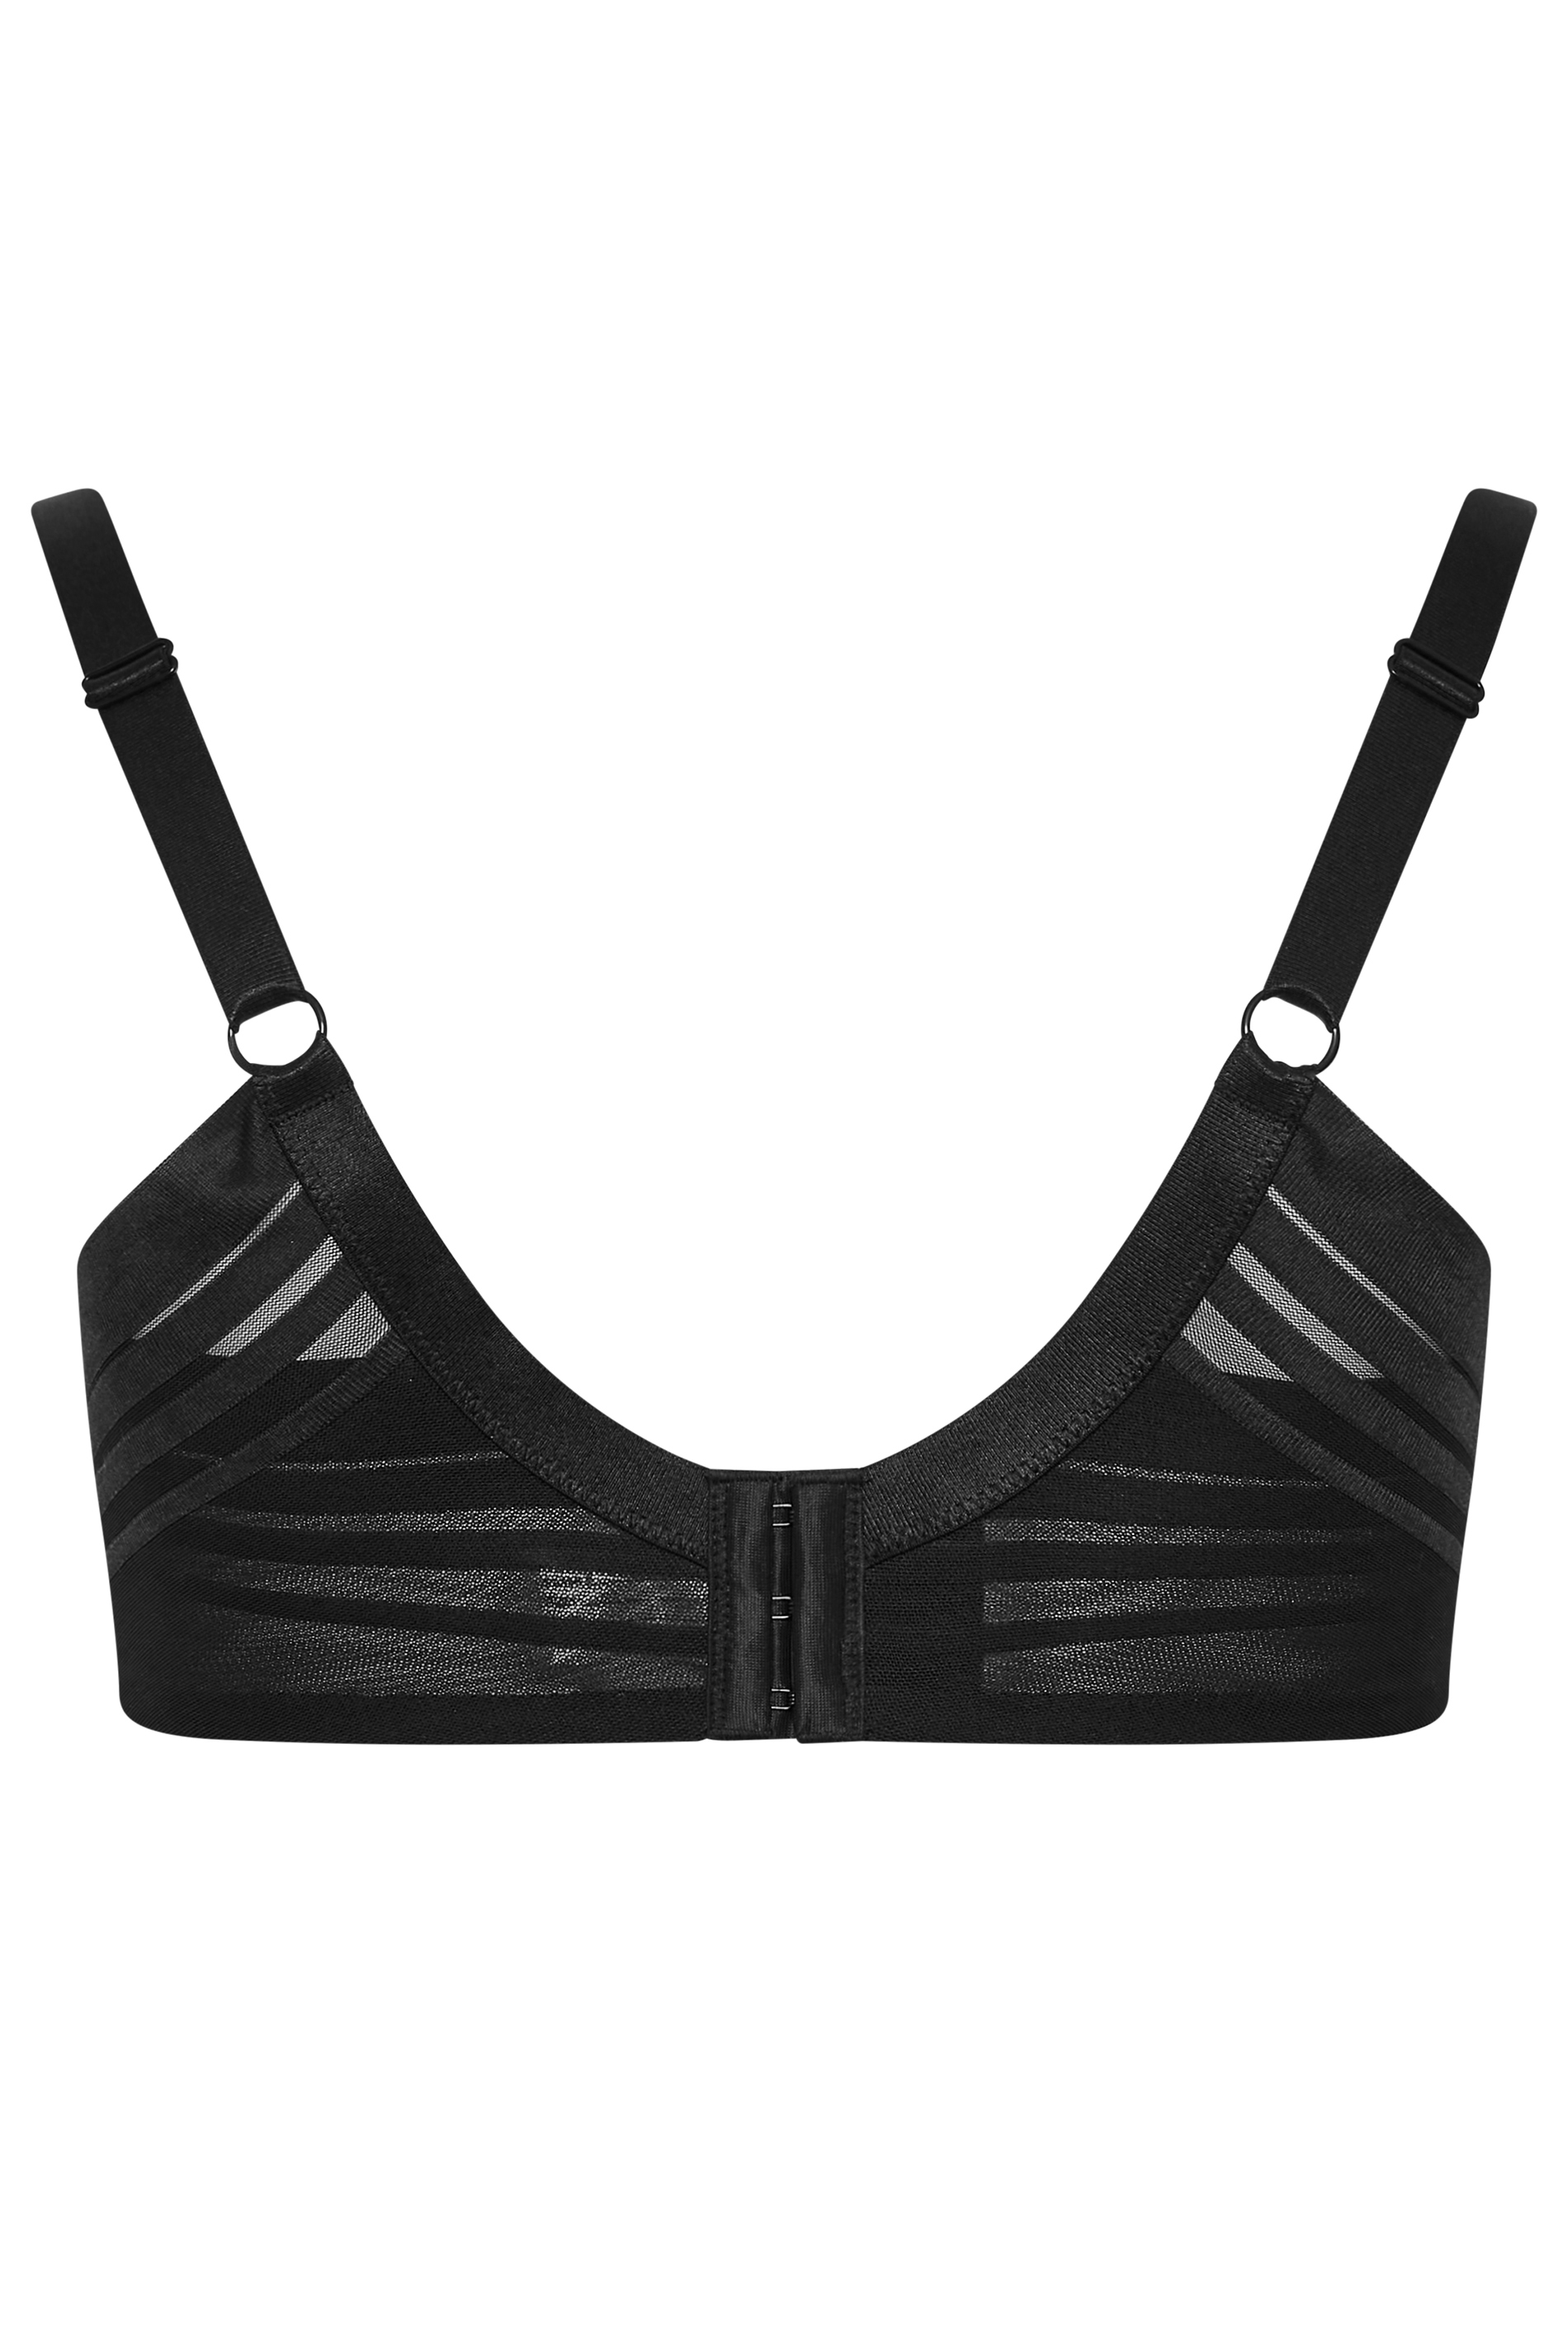 YOURS Plus Size Black Strapping Detail Faux Leather Padded Bra